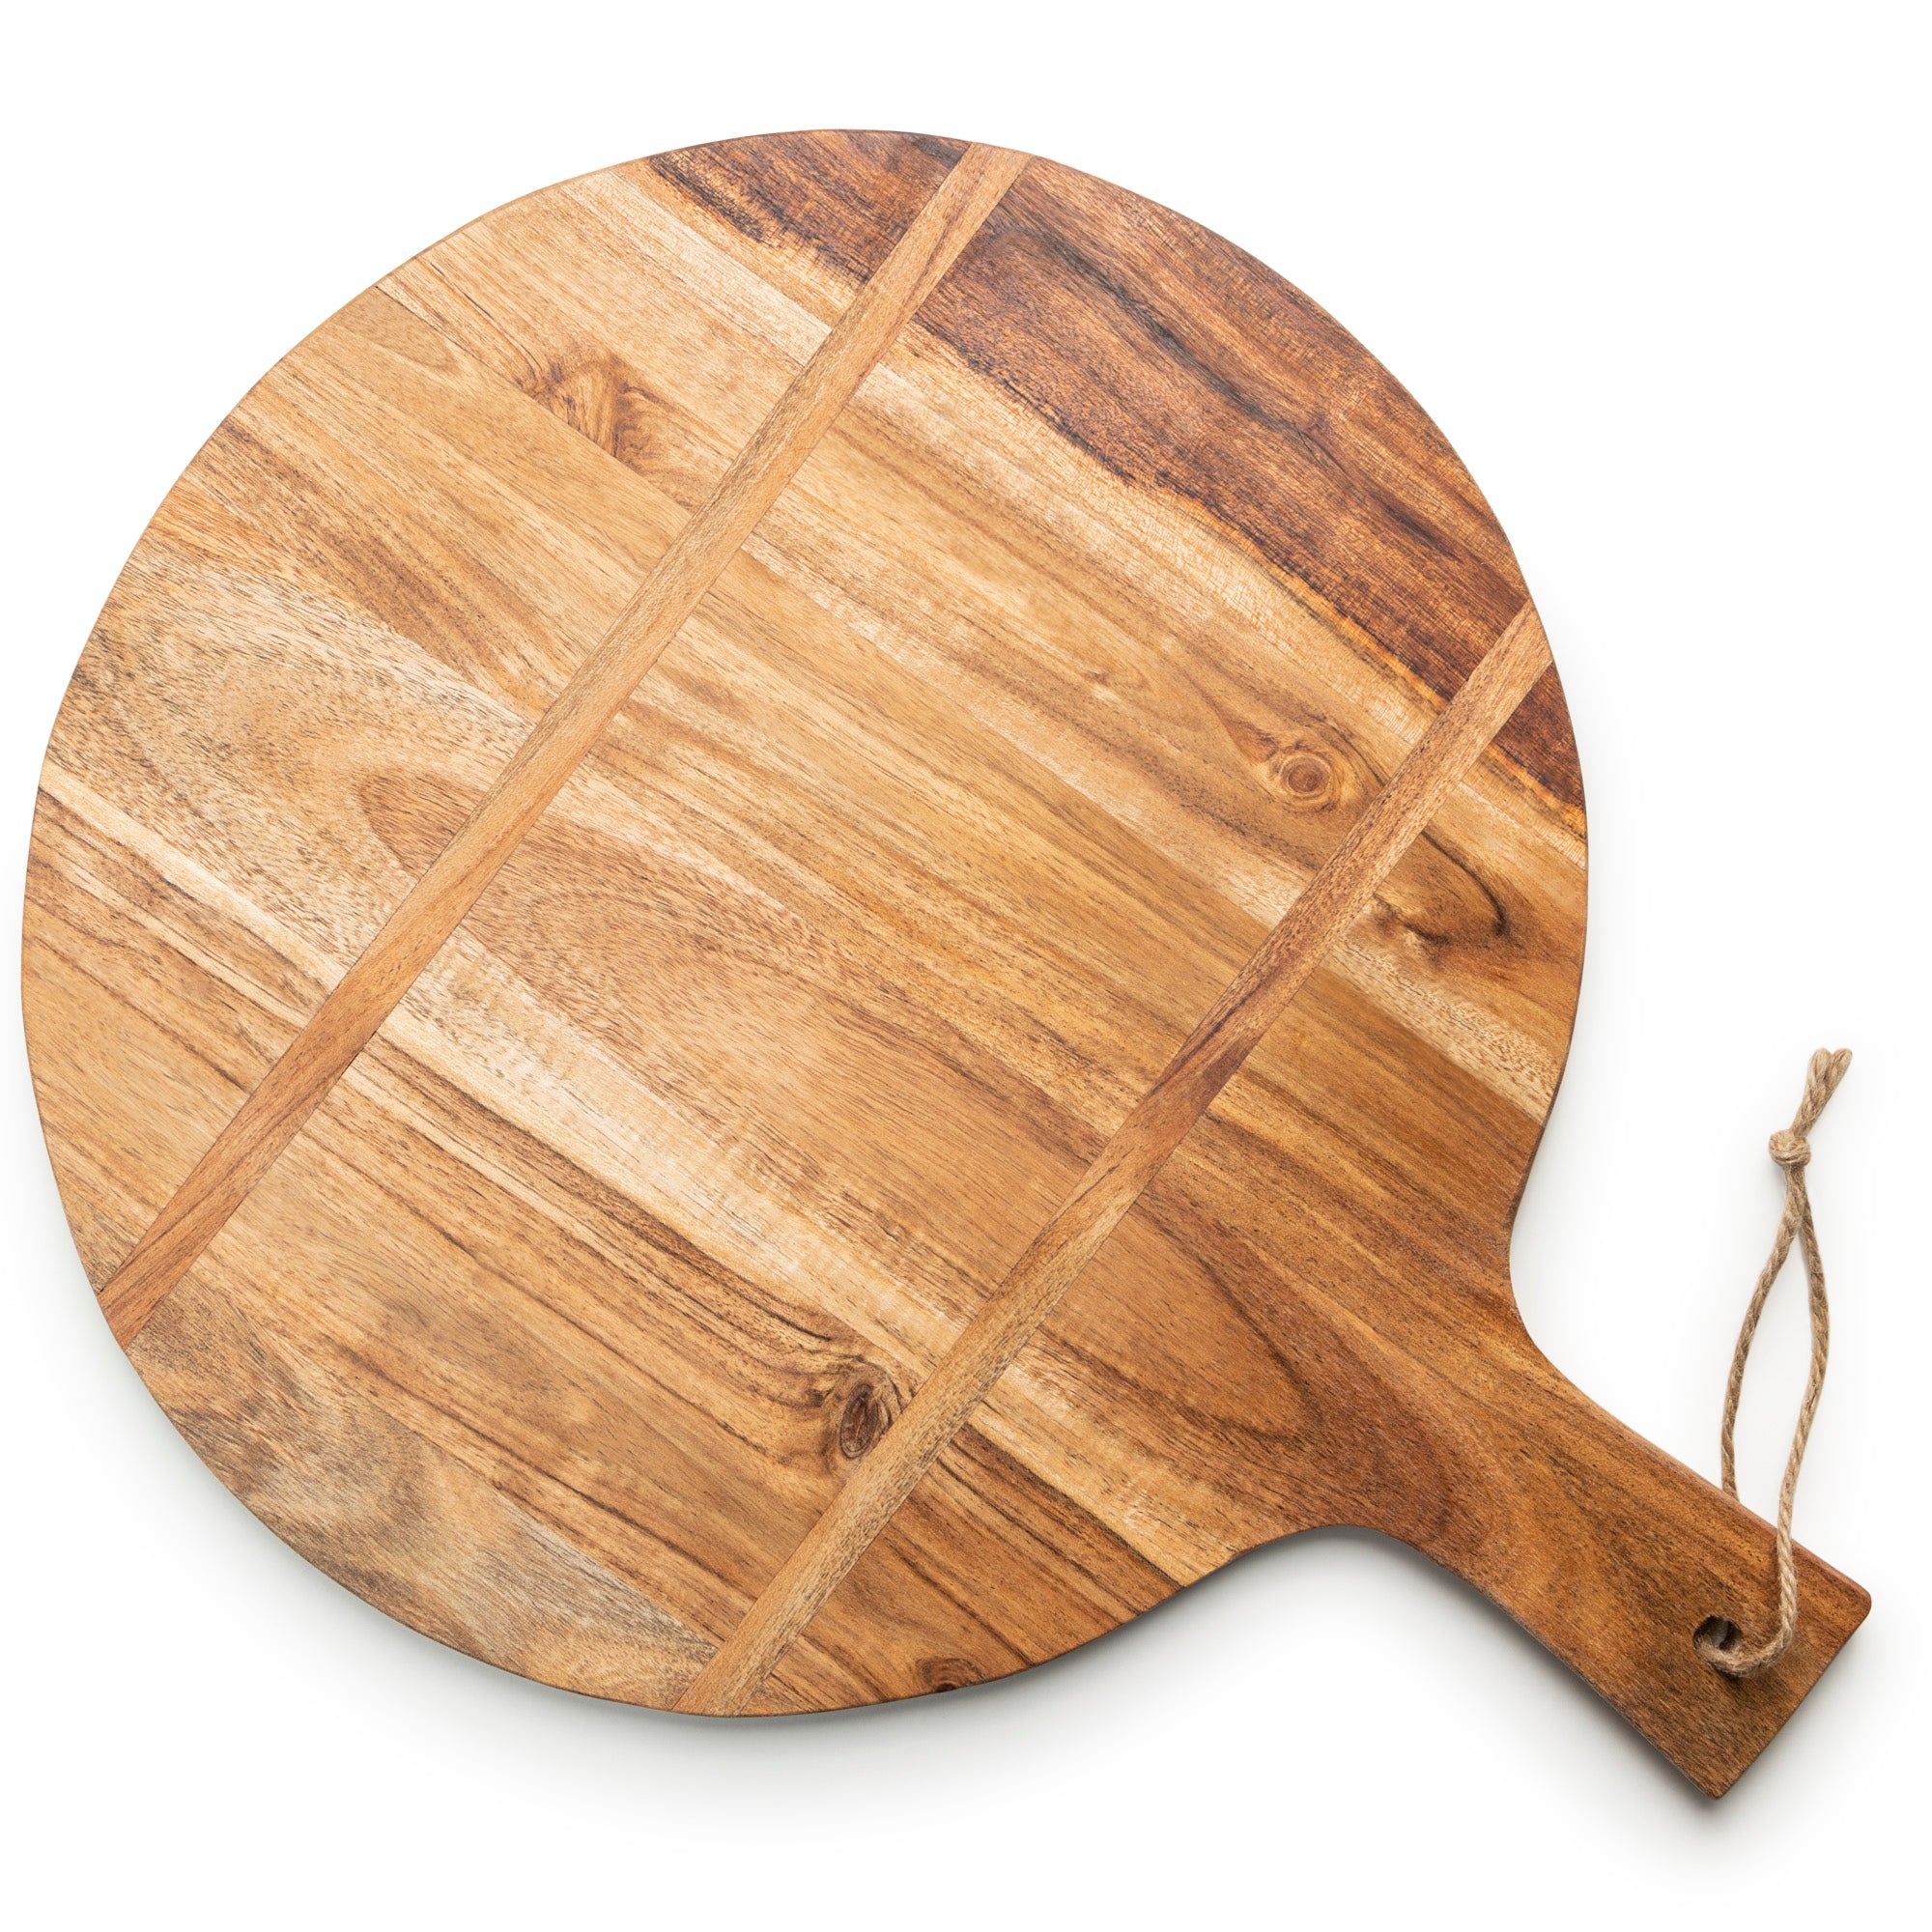 Wooden Cutting Board for Vegetables, Fruit and Cheese